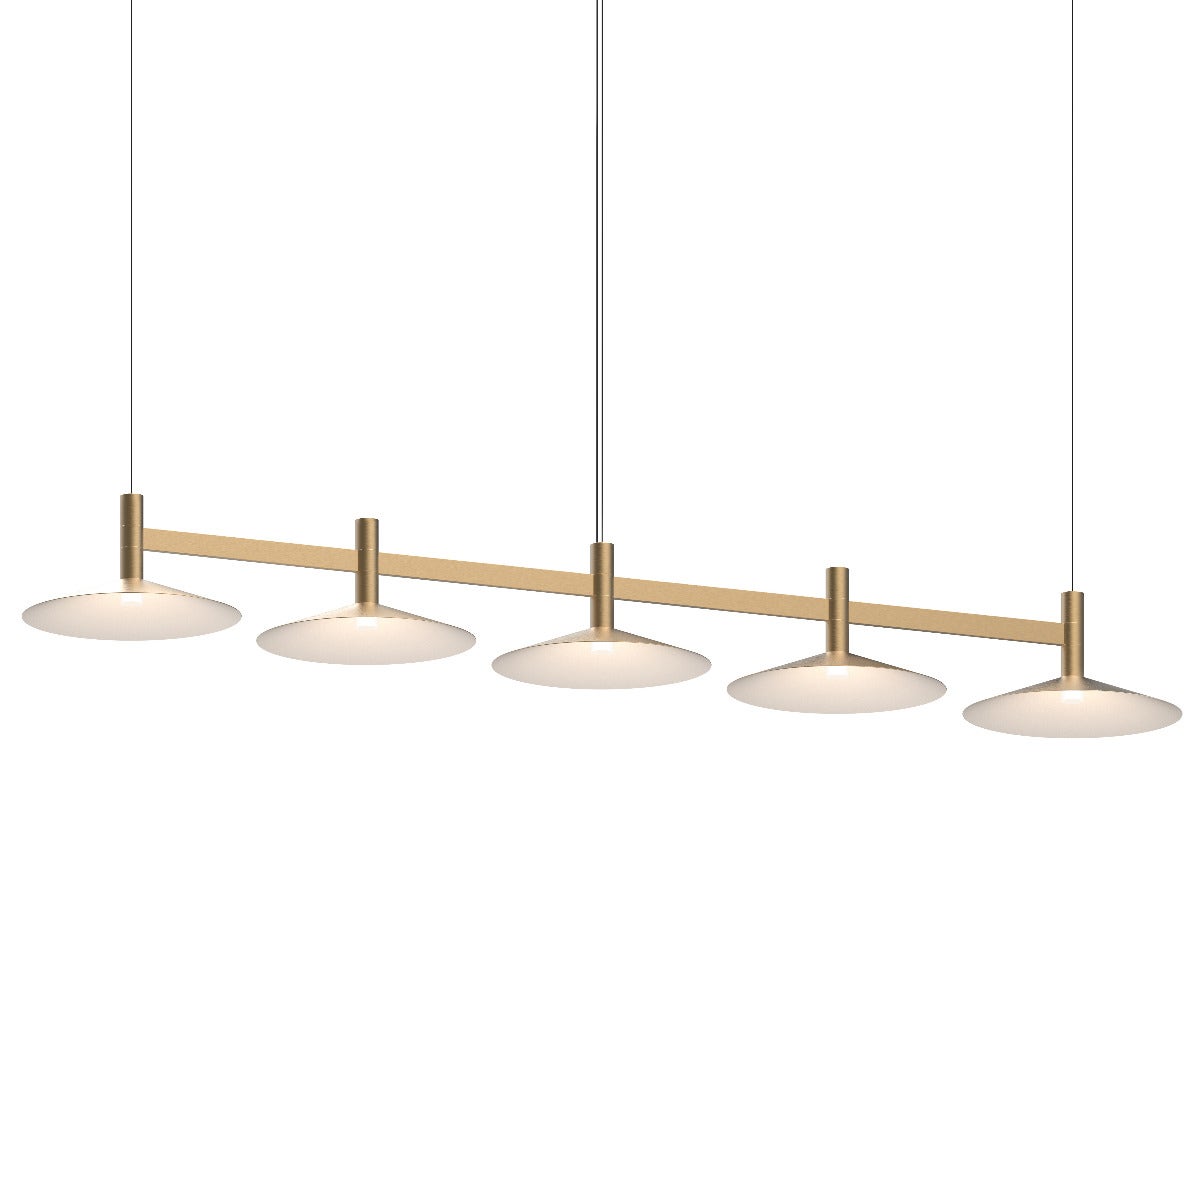 Sonneman Systema Staccato 5-Light Linear Pendant w/Shallow Cone Shades